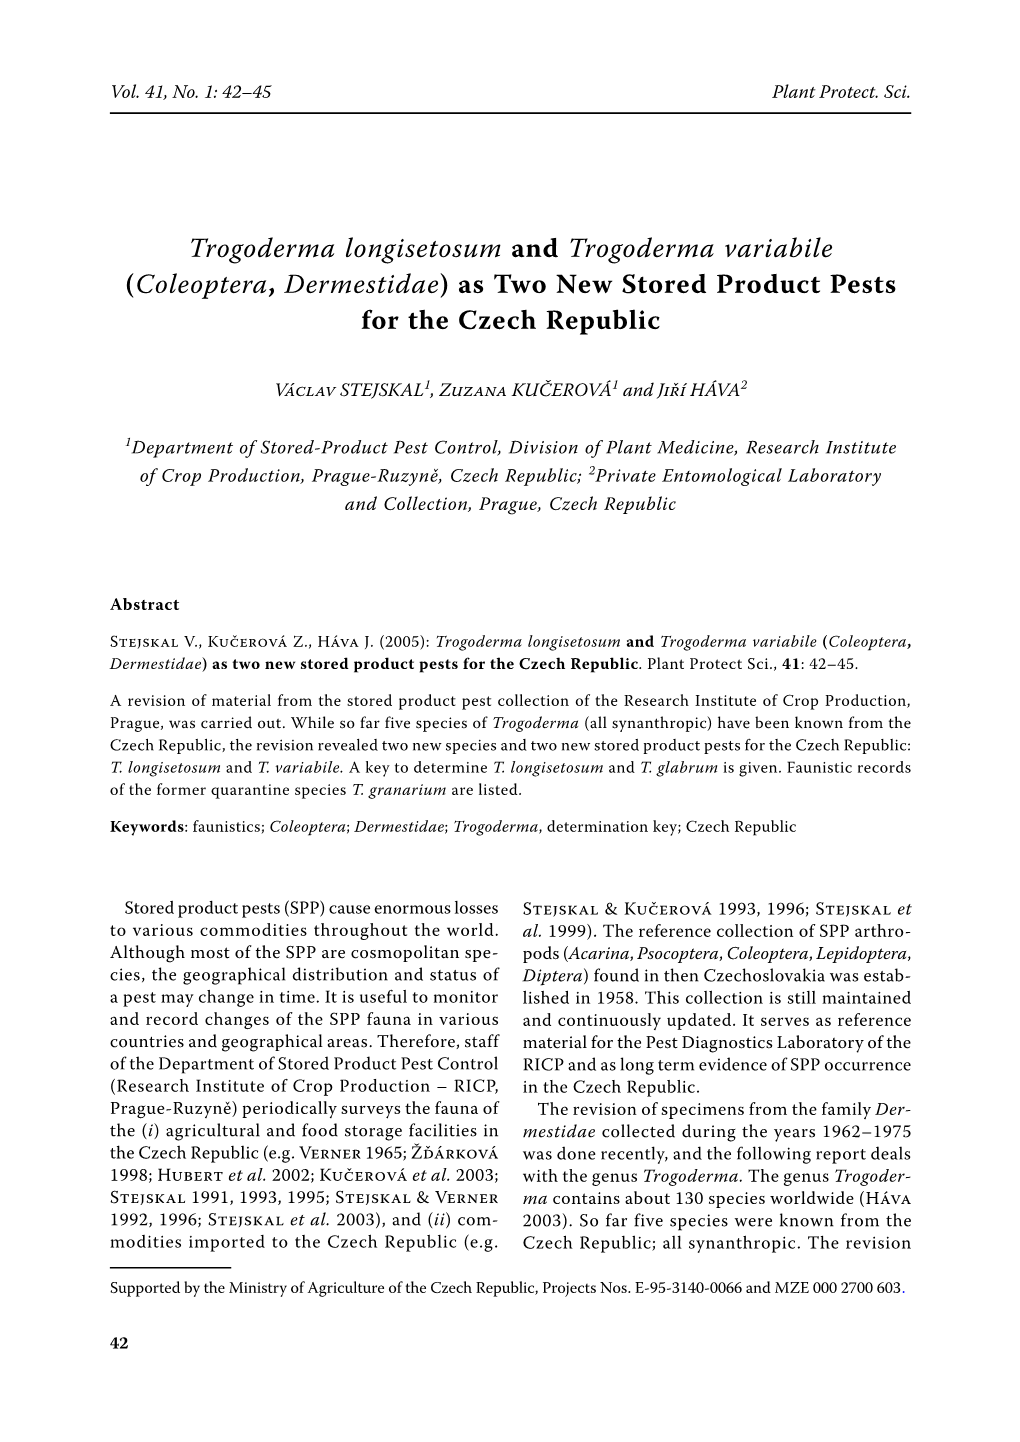 Trogoderma Longisetosum and Trogoderma Variabile (Coleoptera, Dermestidae) As Two New Stored Product Pests for the Czech Republic